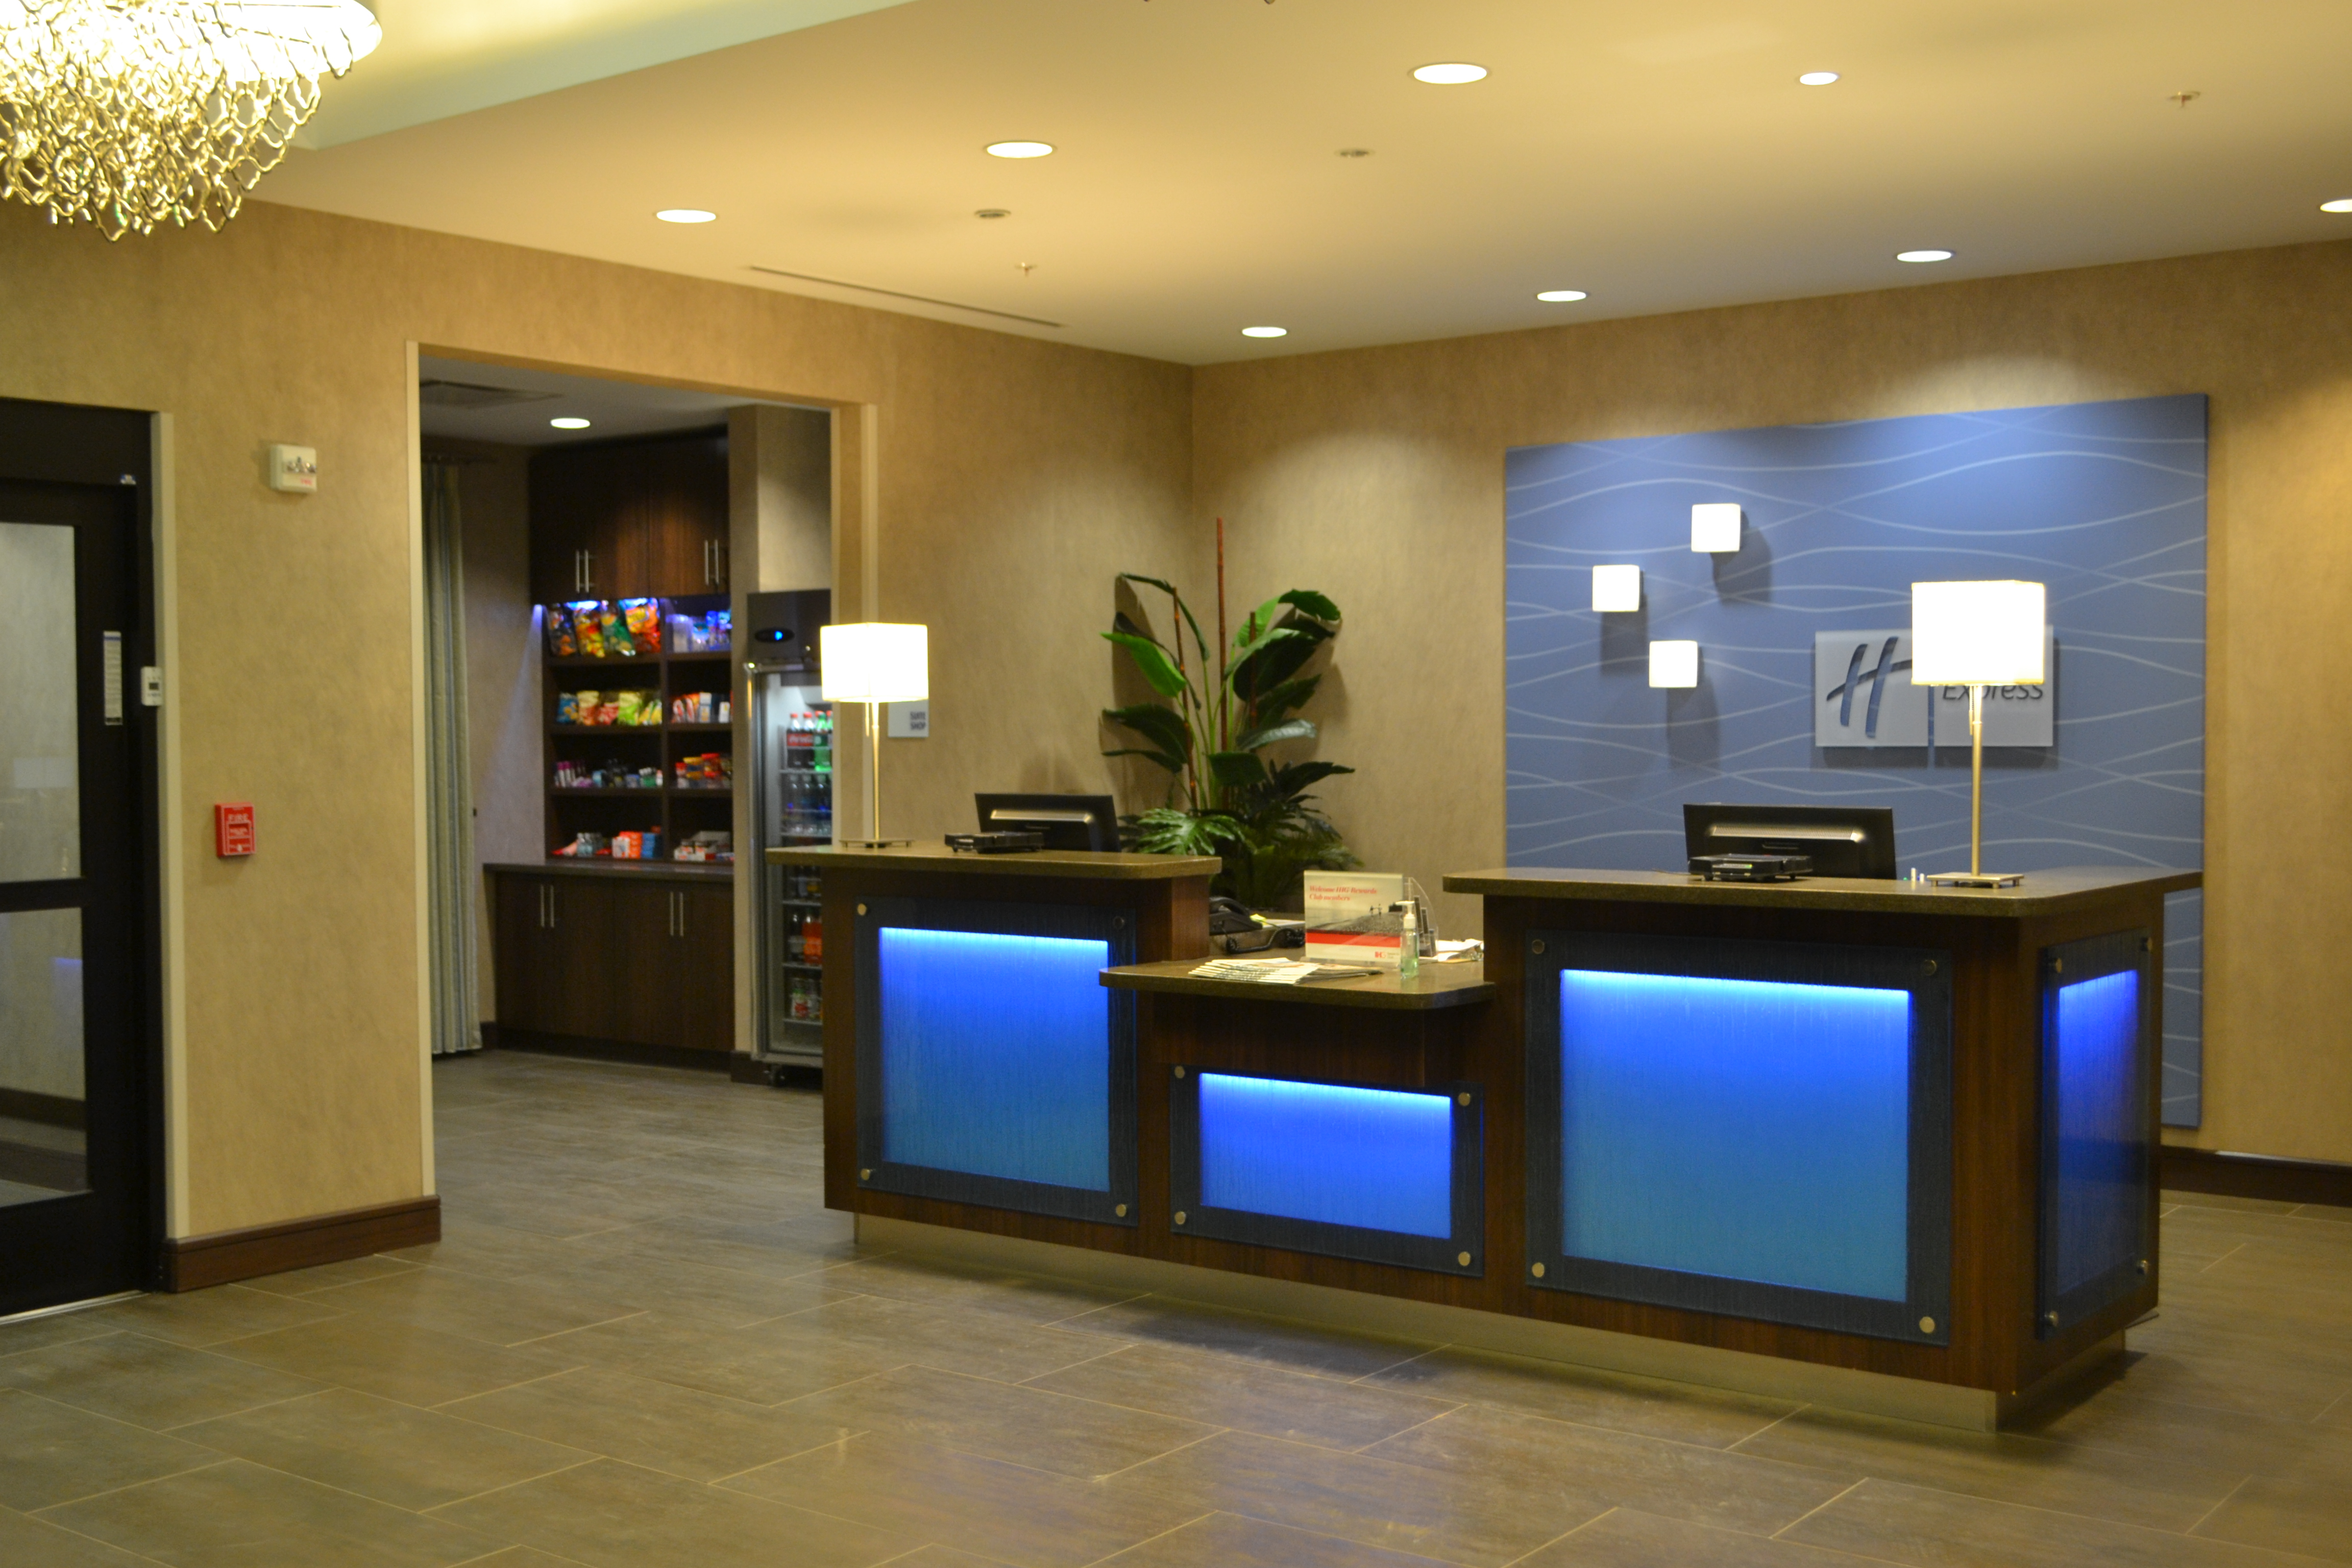 Holiday Inn Express & Suites – I-20 image